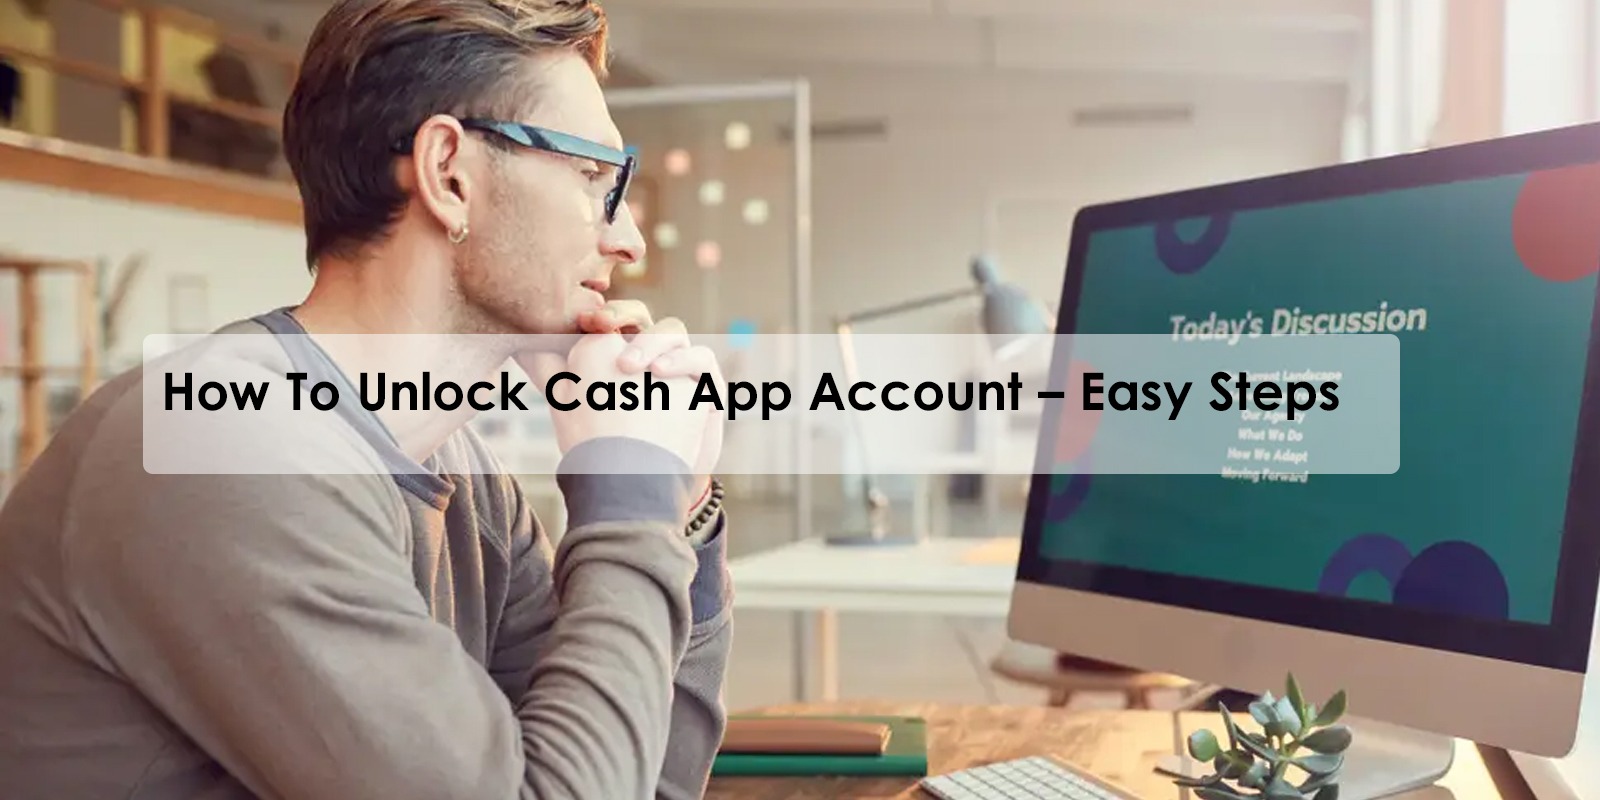 How To Unlock Cash App Account – Easy Steps